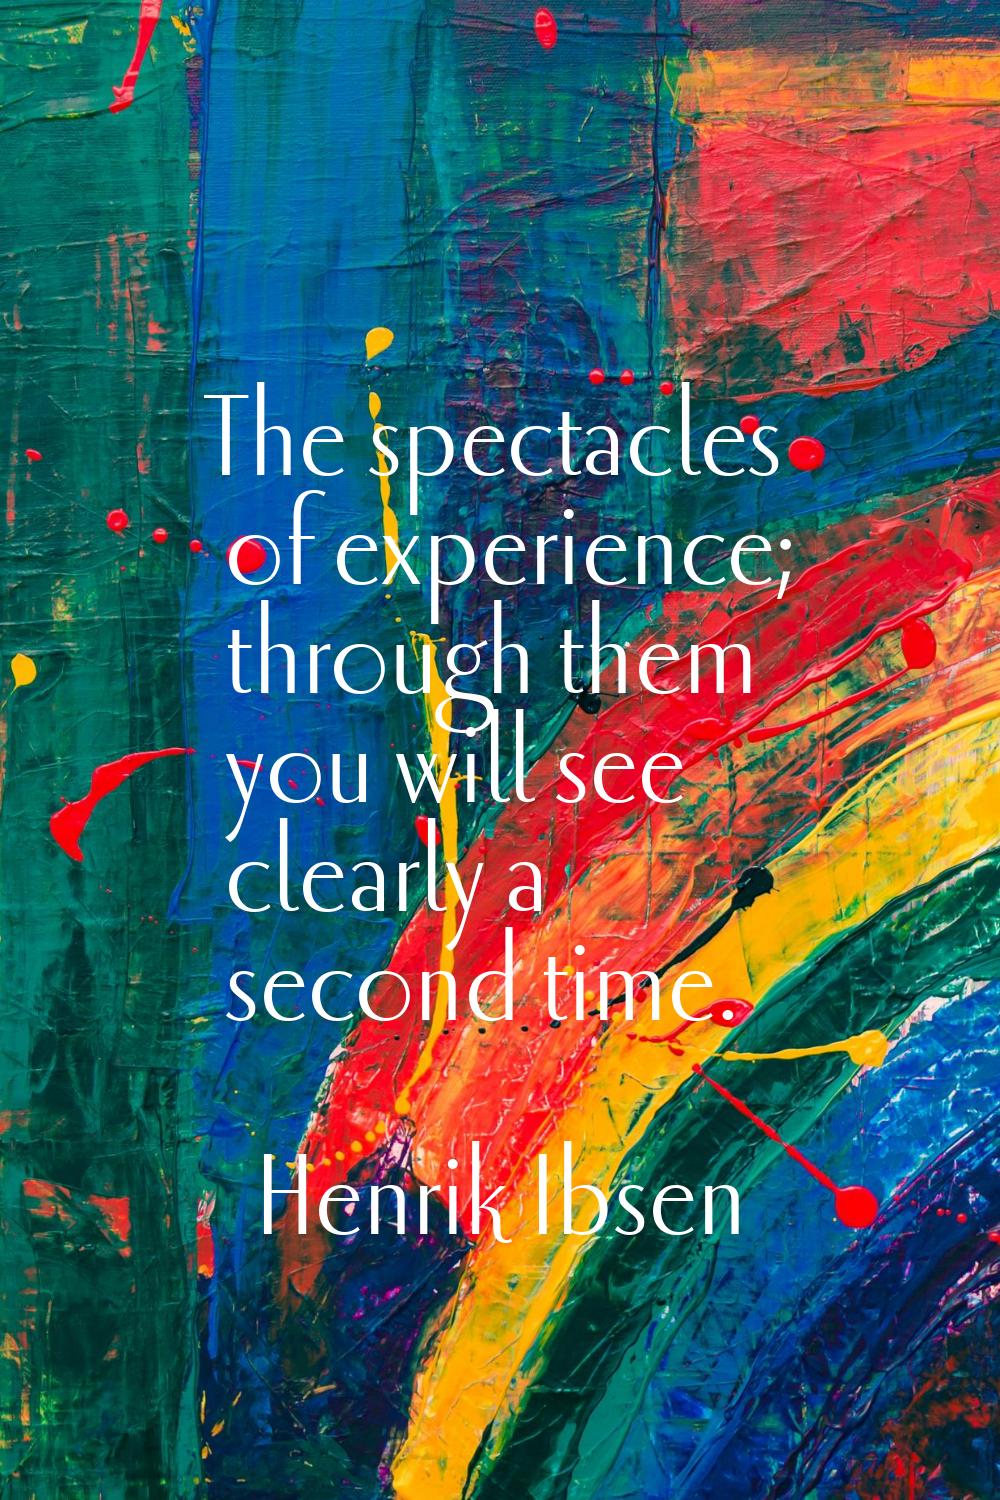 The spectacles of experience; through them you will see clearly a second time.